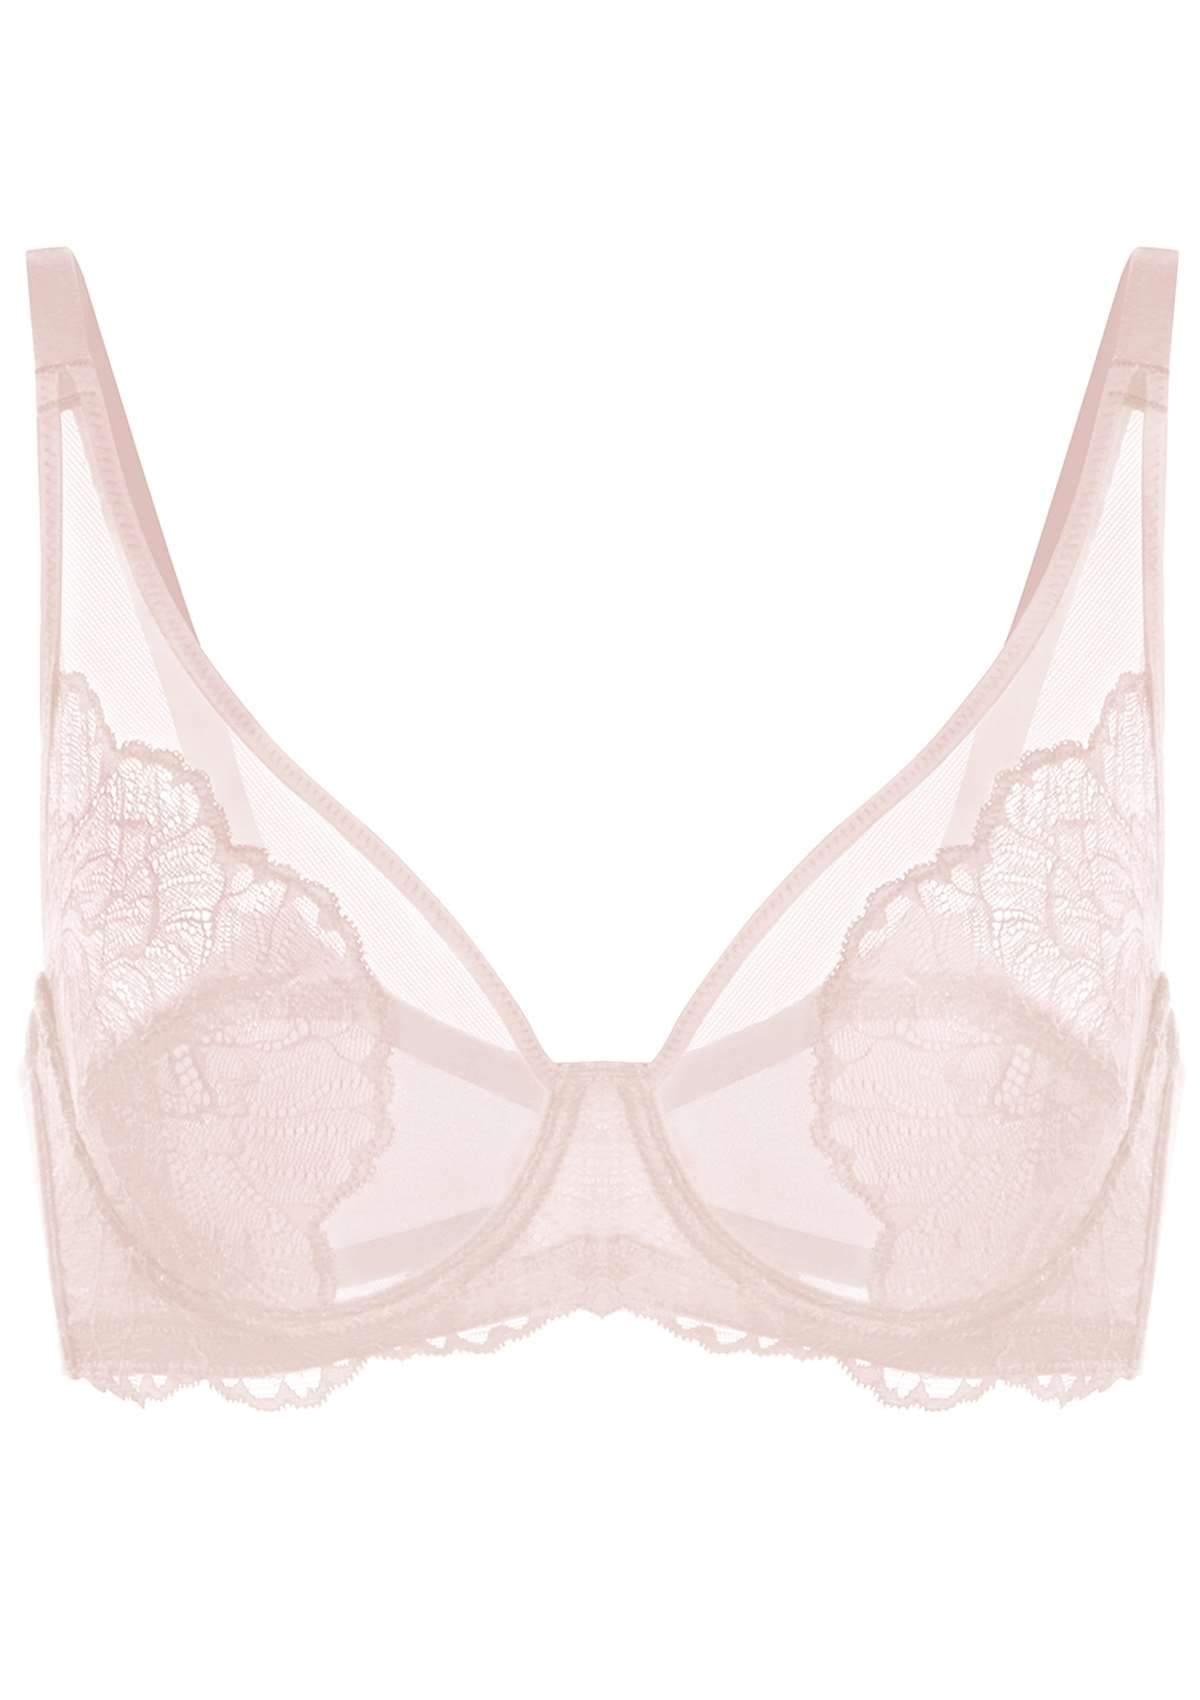 HSIA Blossom Lace Bra And Panties Set: Best Bra For Large Busts - Dark Pink / 36 / C